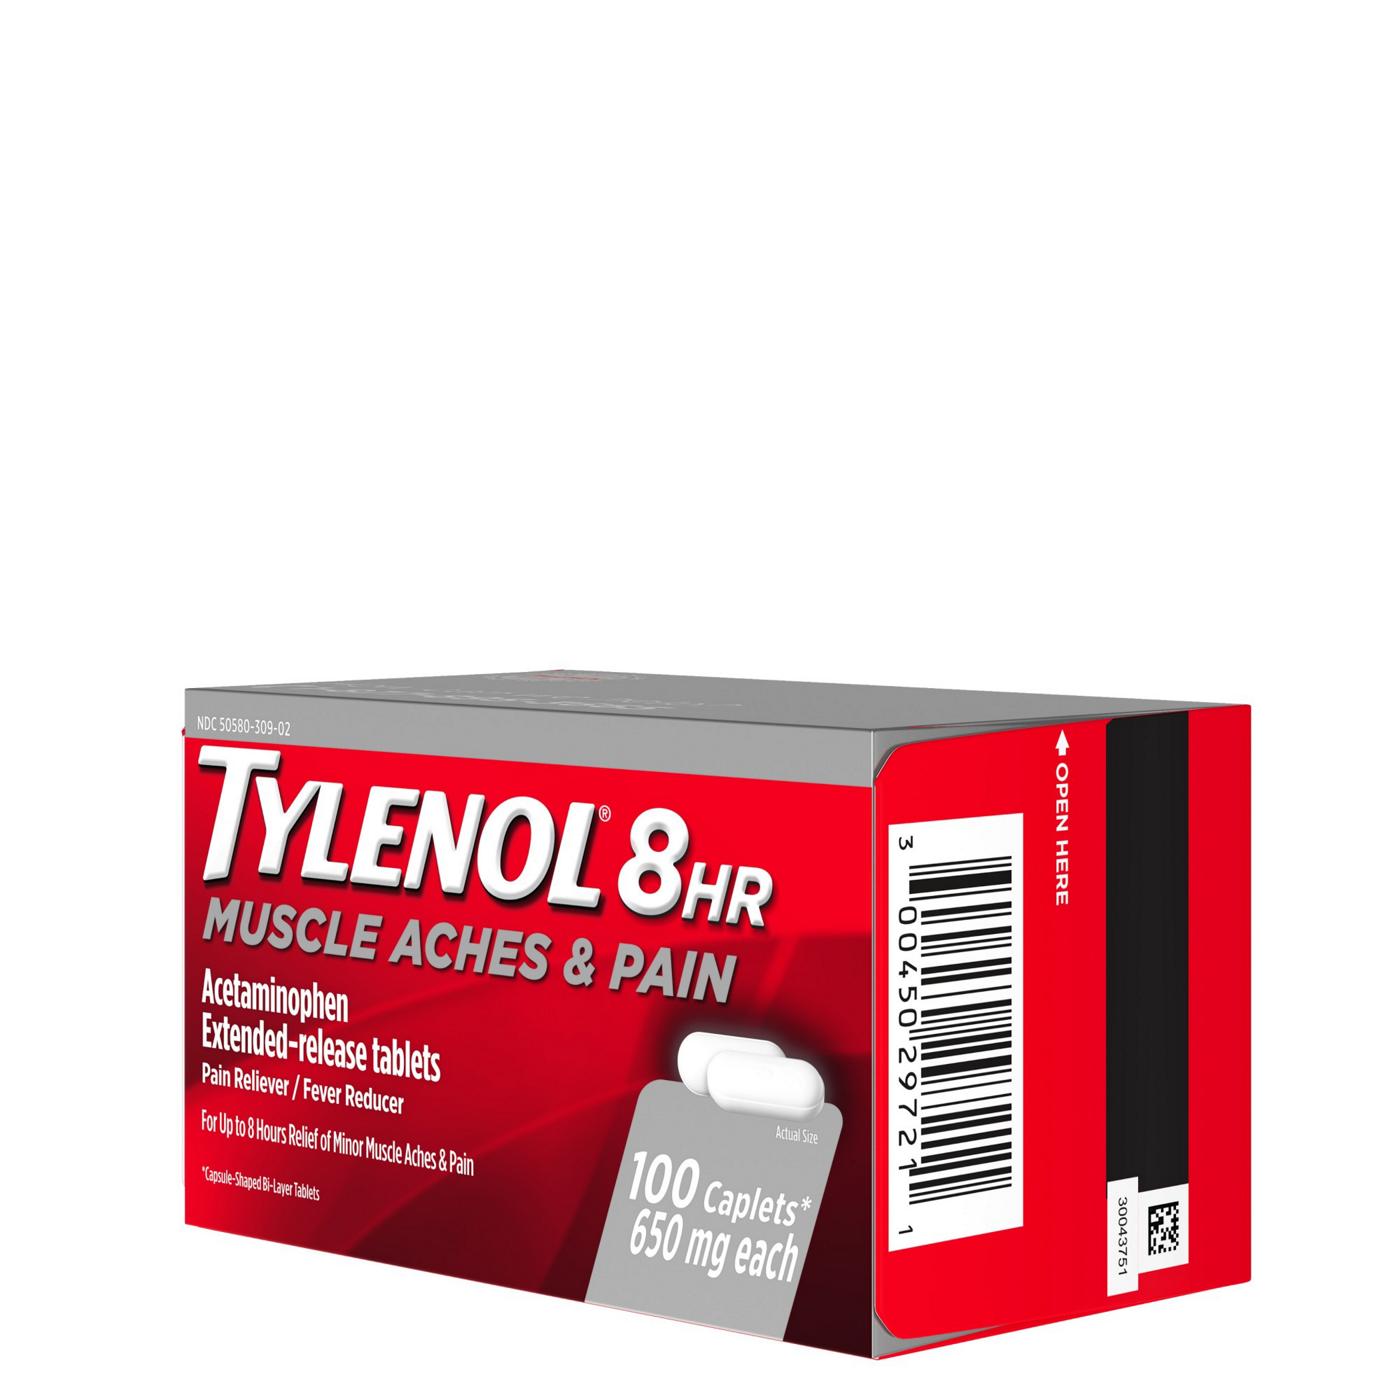 Tylenol 8 HR Muscle Aches & Pains; image 6 of 8